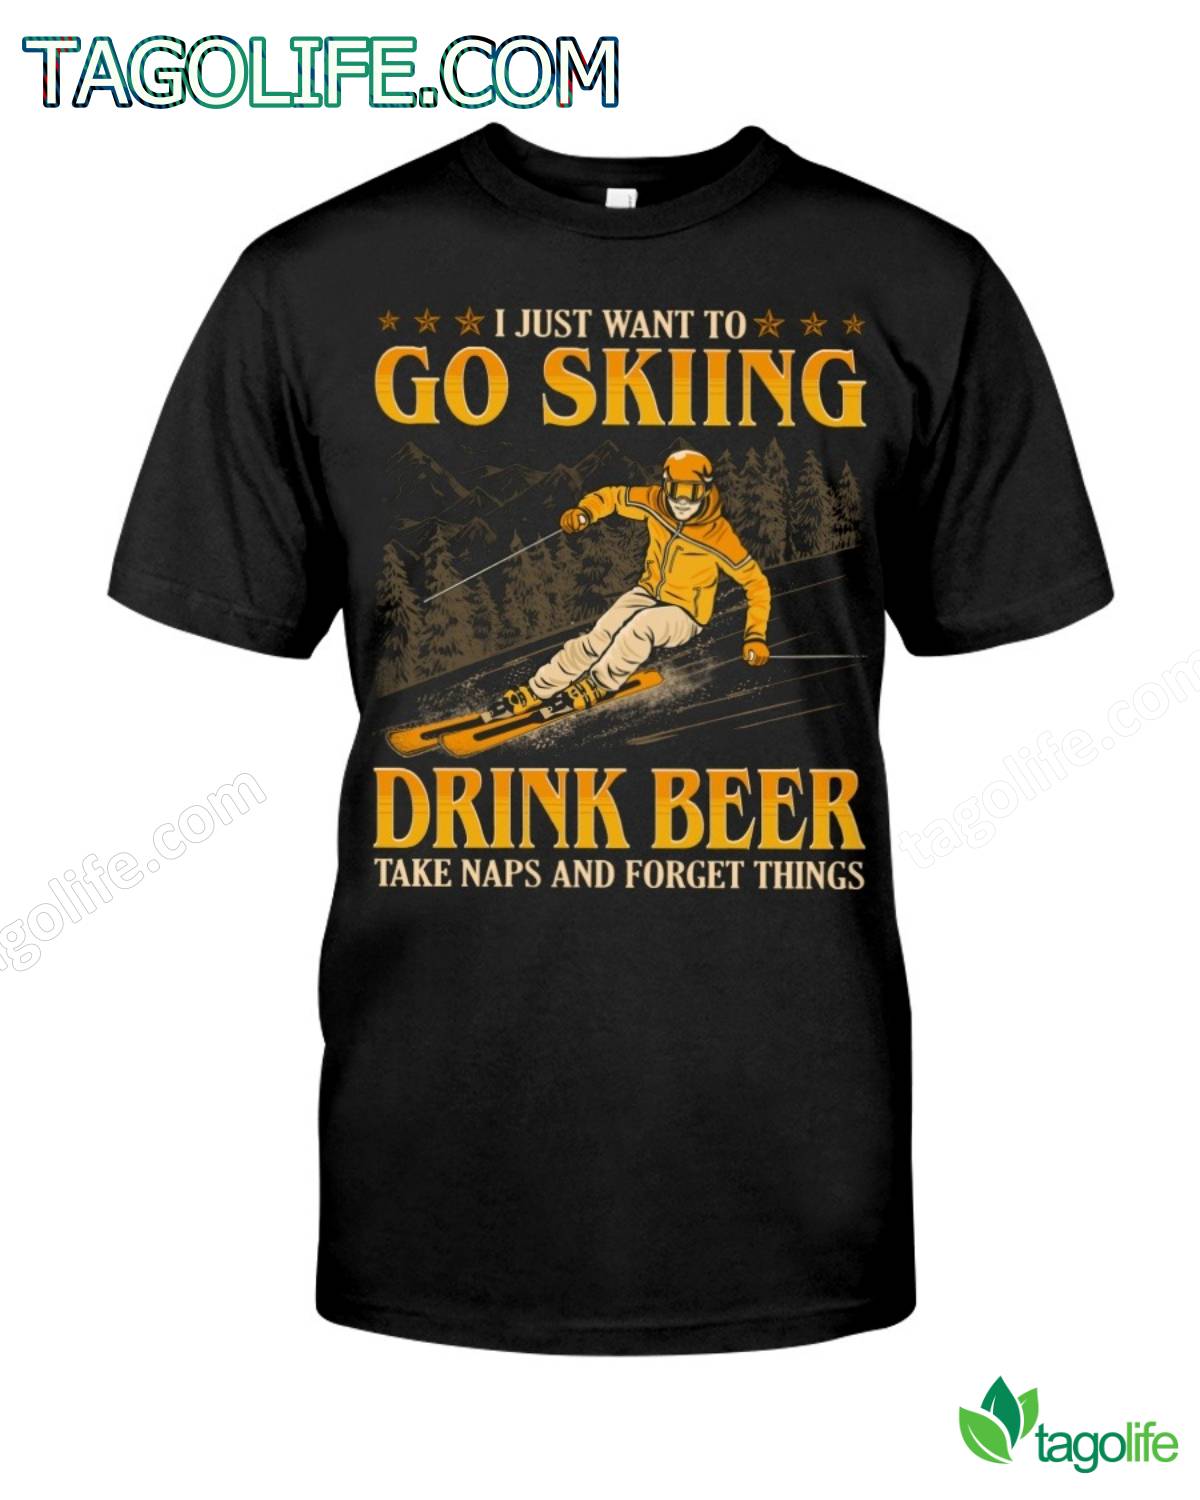 I Just Want To Go Skiing - Drink Beer Take Naps Forget Things T-Shirt